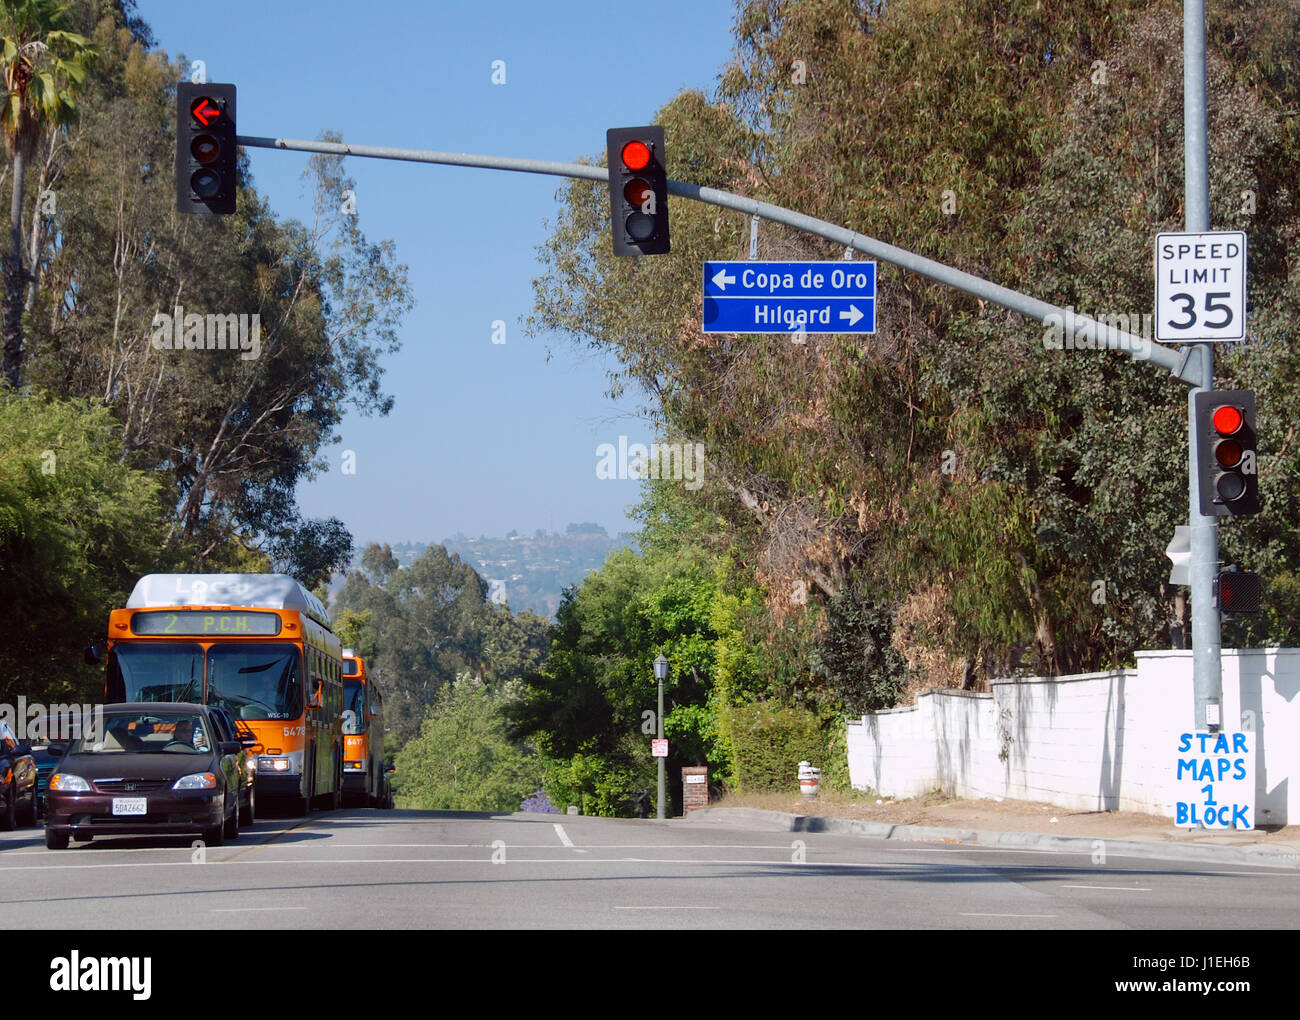 Sunset Blvd intersection with Copa de Oro and Hilgard, West Hollywood, Los Angeles, California, USA Stock Photo